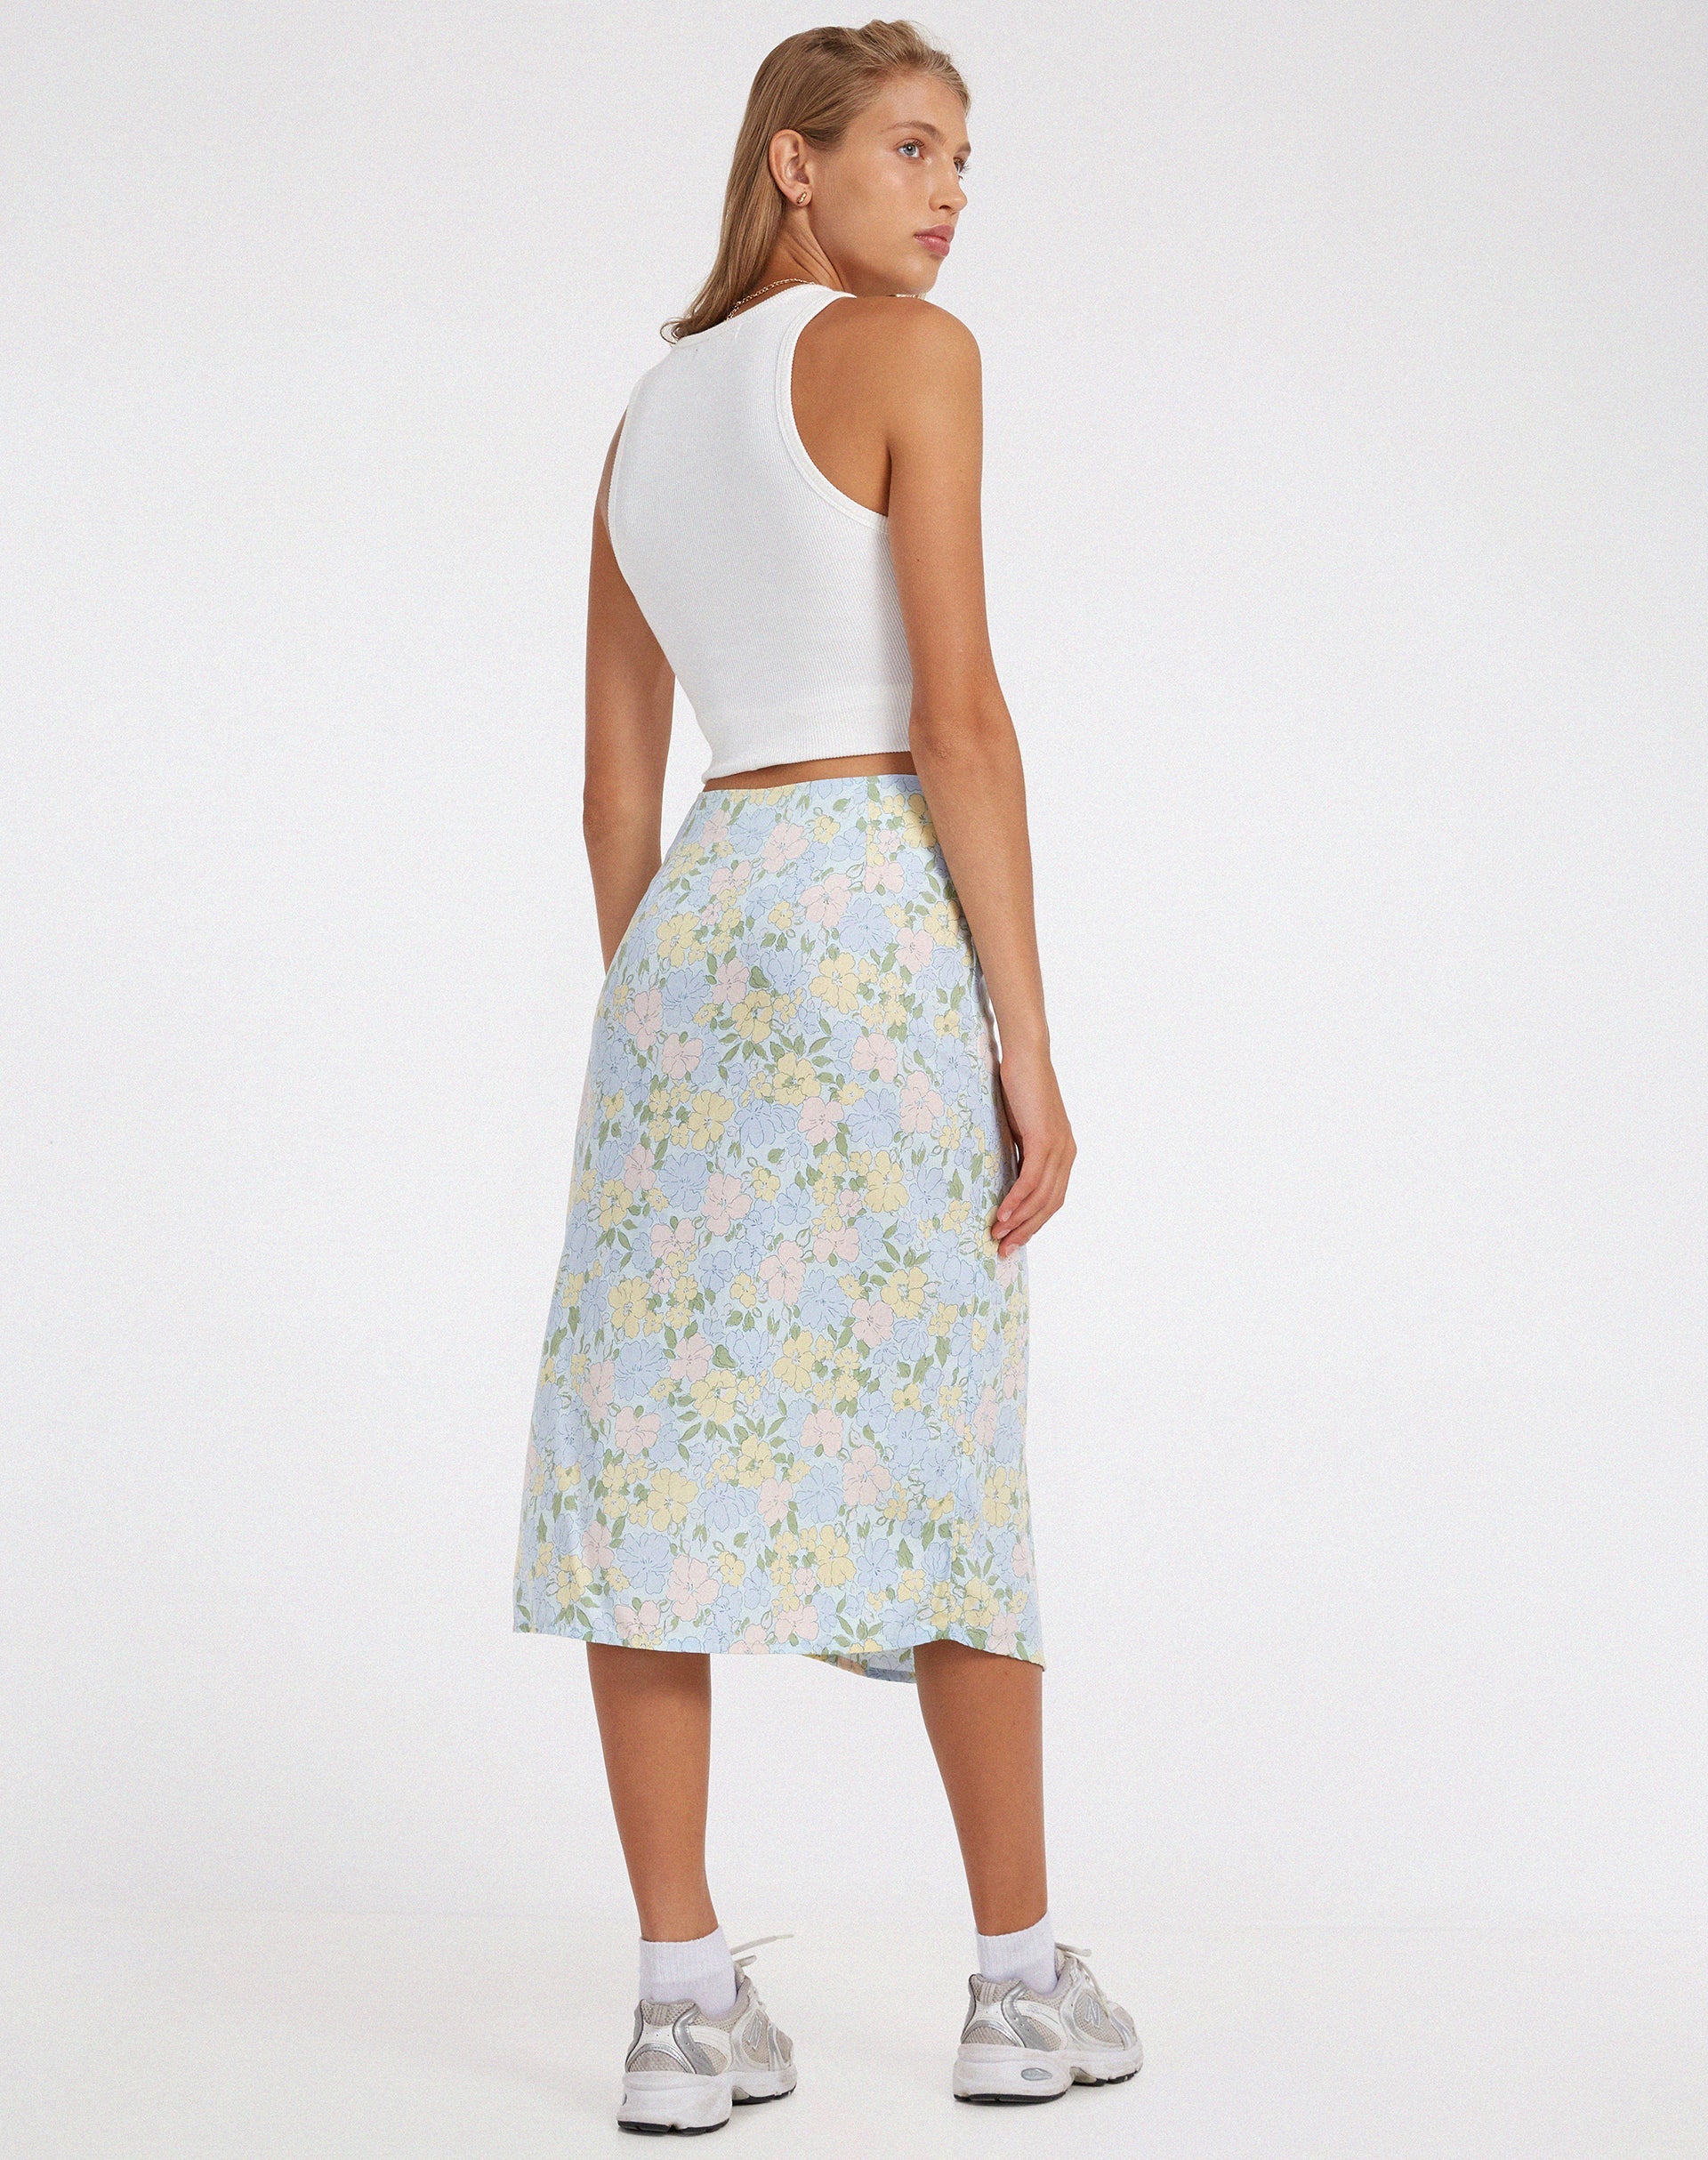 Image of Seko Midi Skirt in Washed Out Pastel Floral